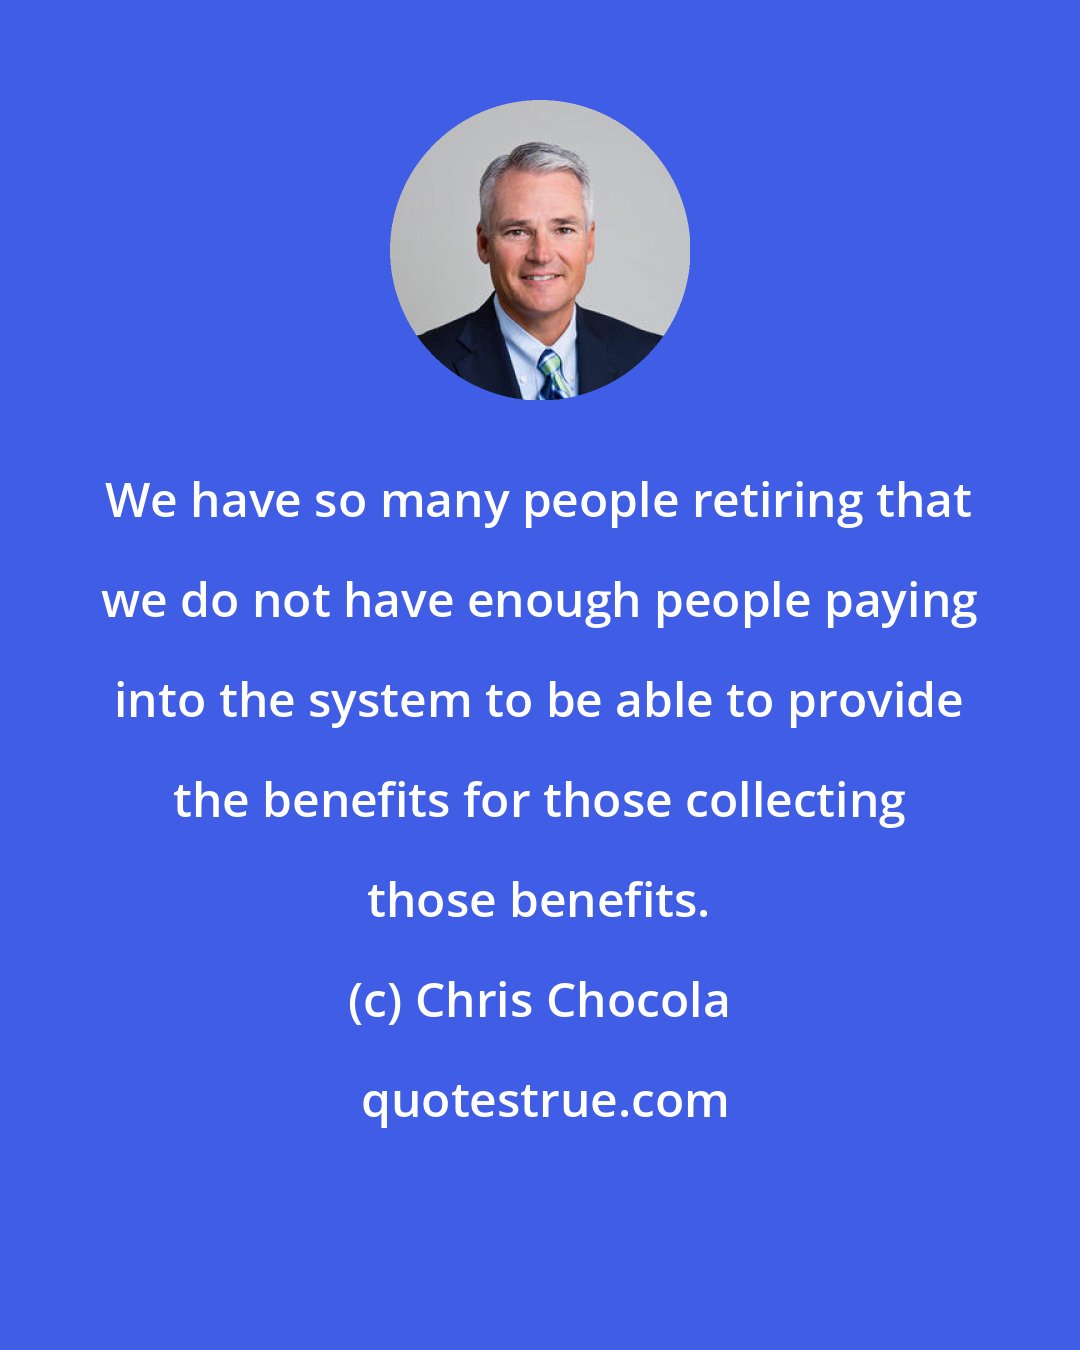 Chris Chocola: We have so many people retiring that we do not have enough people paying into the system to be able to provide the benefits for those collecting those benefits.